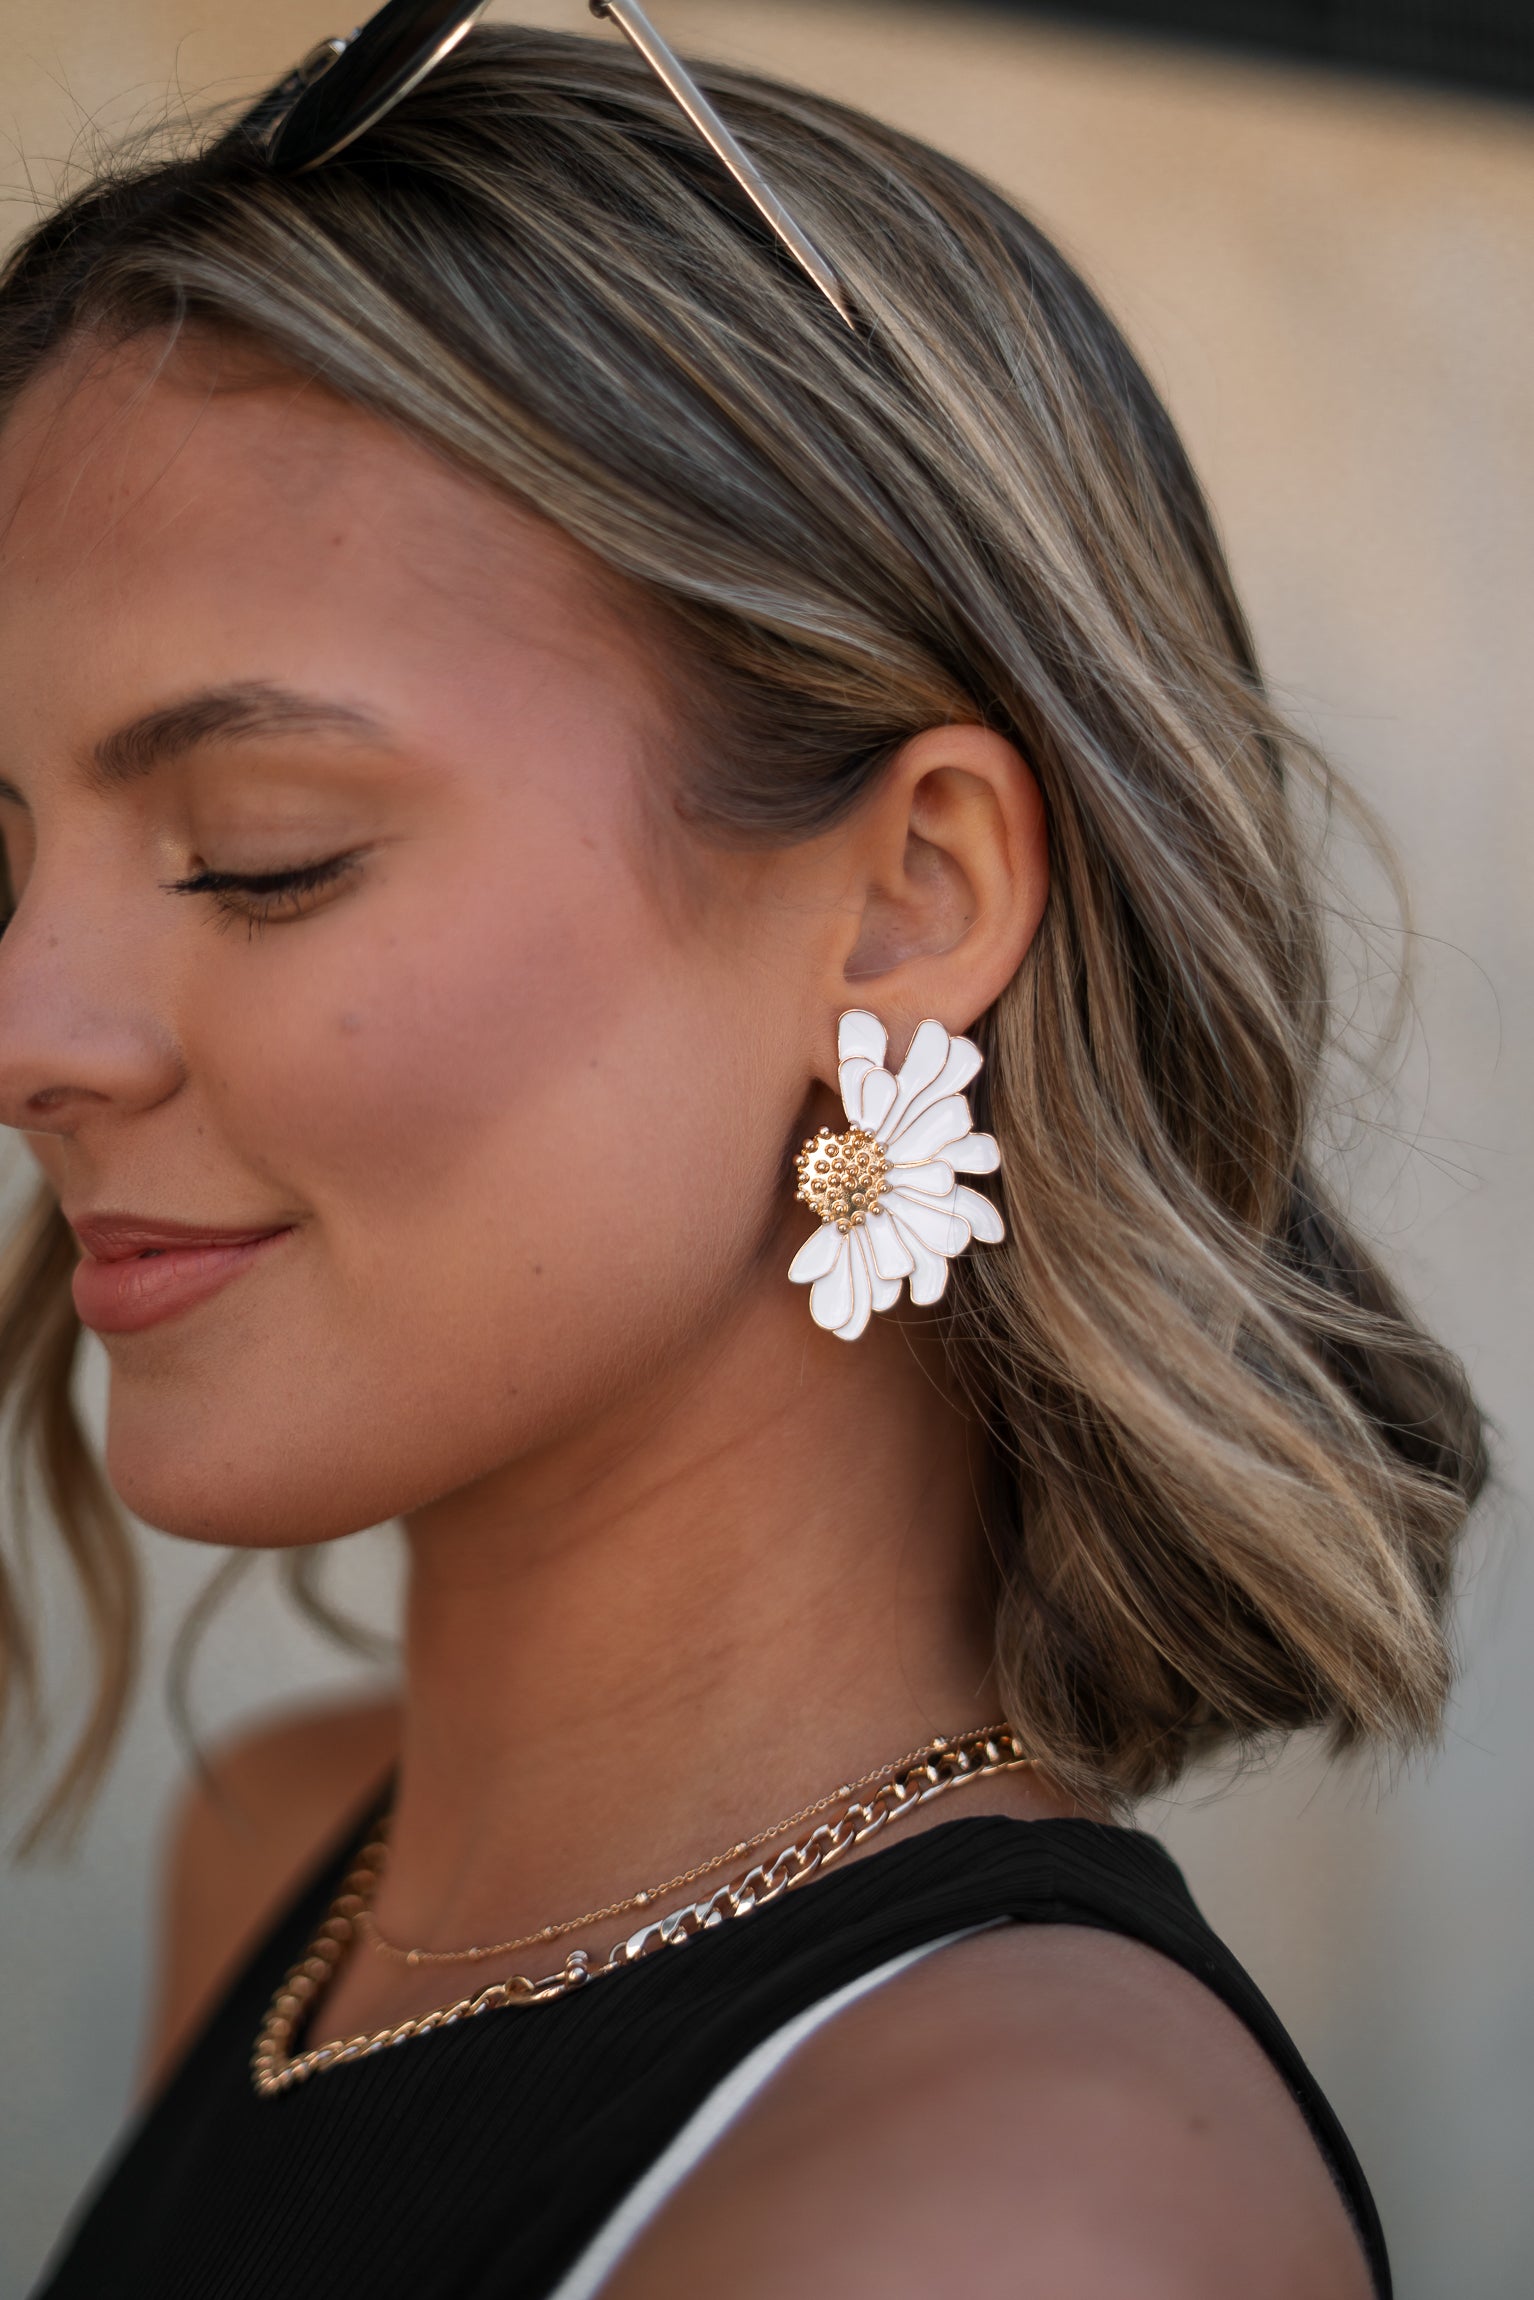 Side view of female model wearing the Chloe White & Gold Flower Stud Earring which features oversized white flower studs with gold details